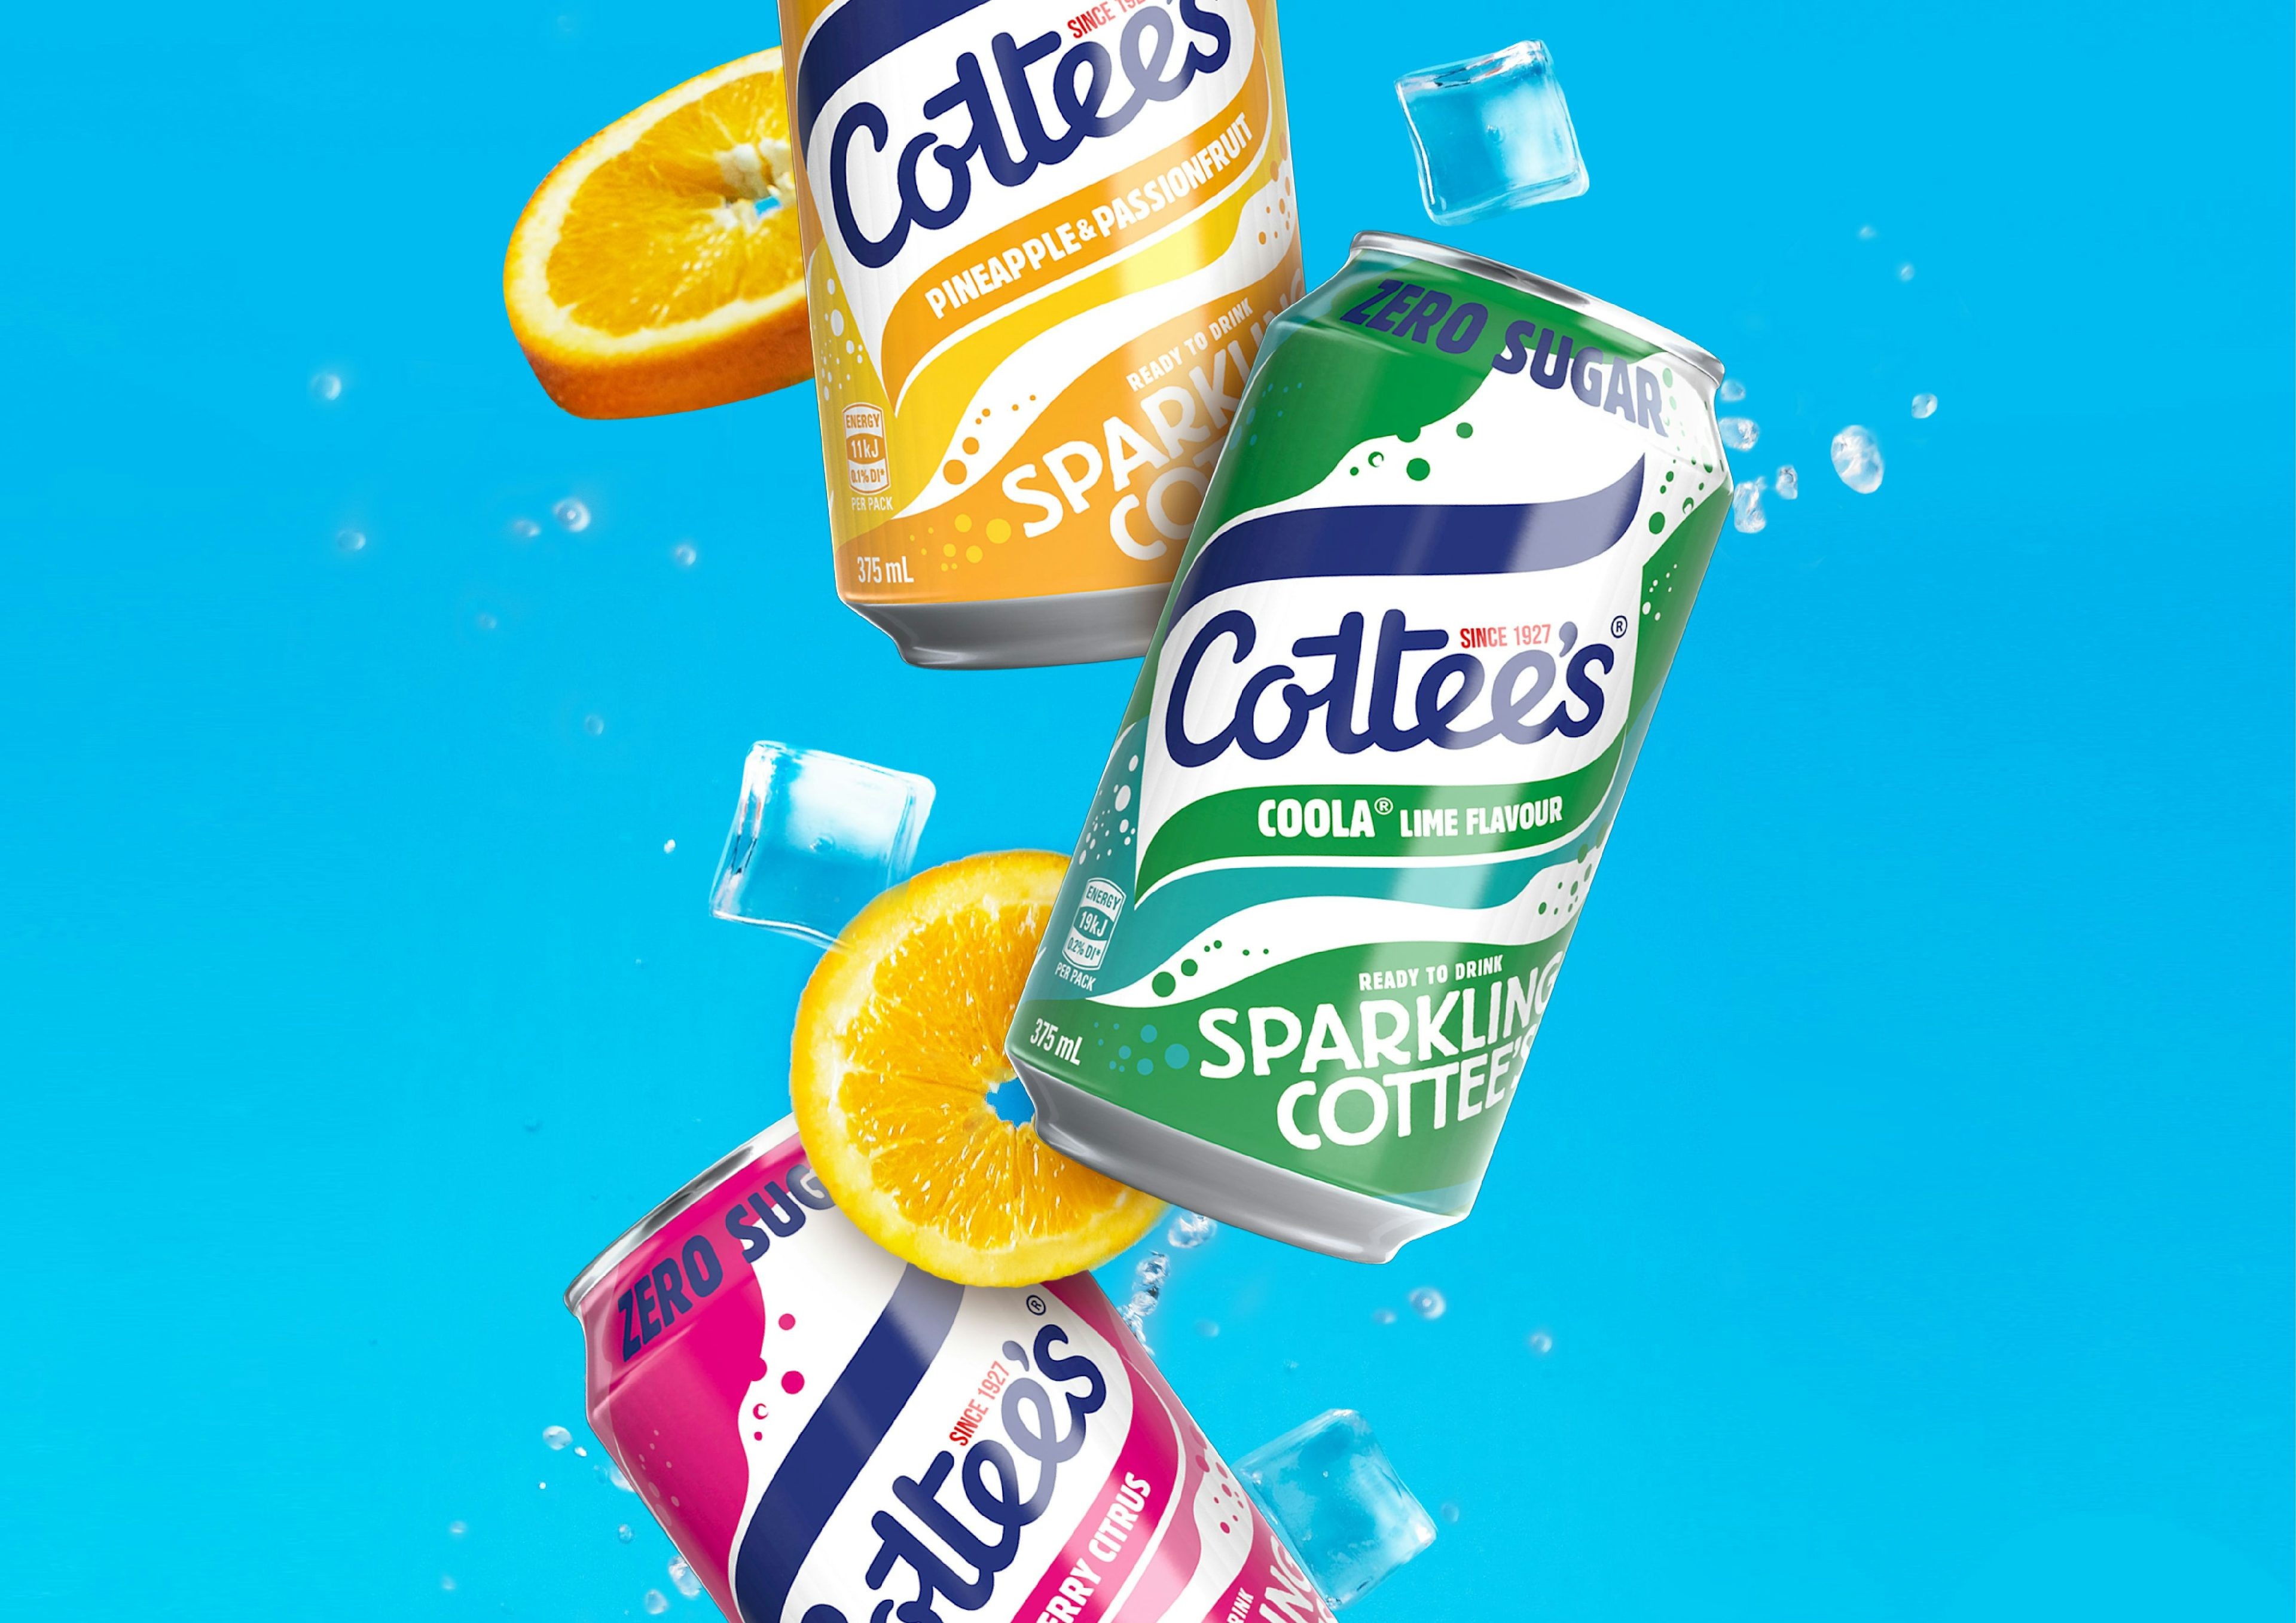 Thumbnail image for project: Cottee's Sparkling